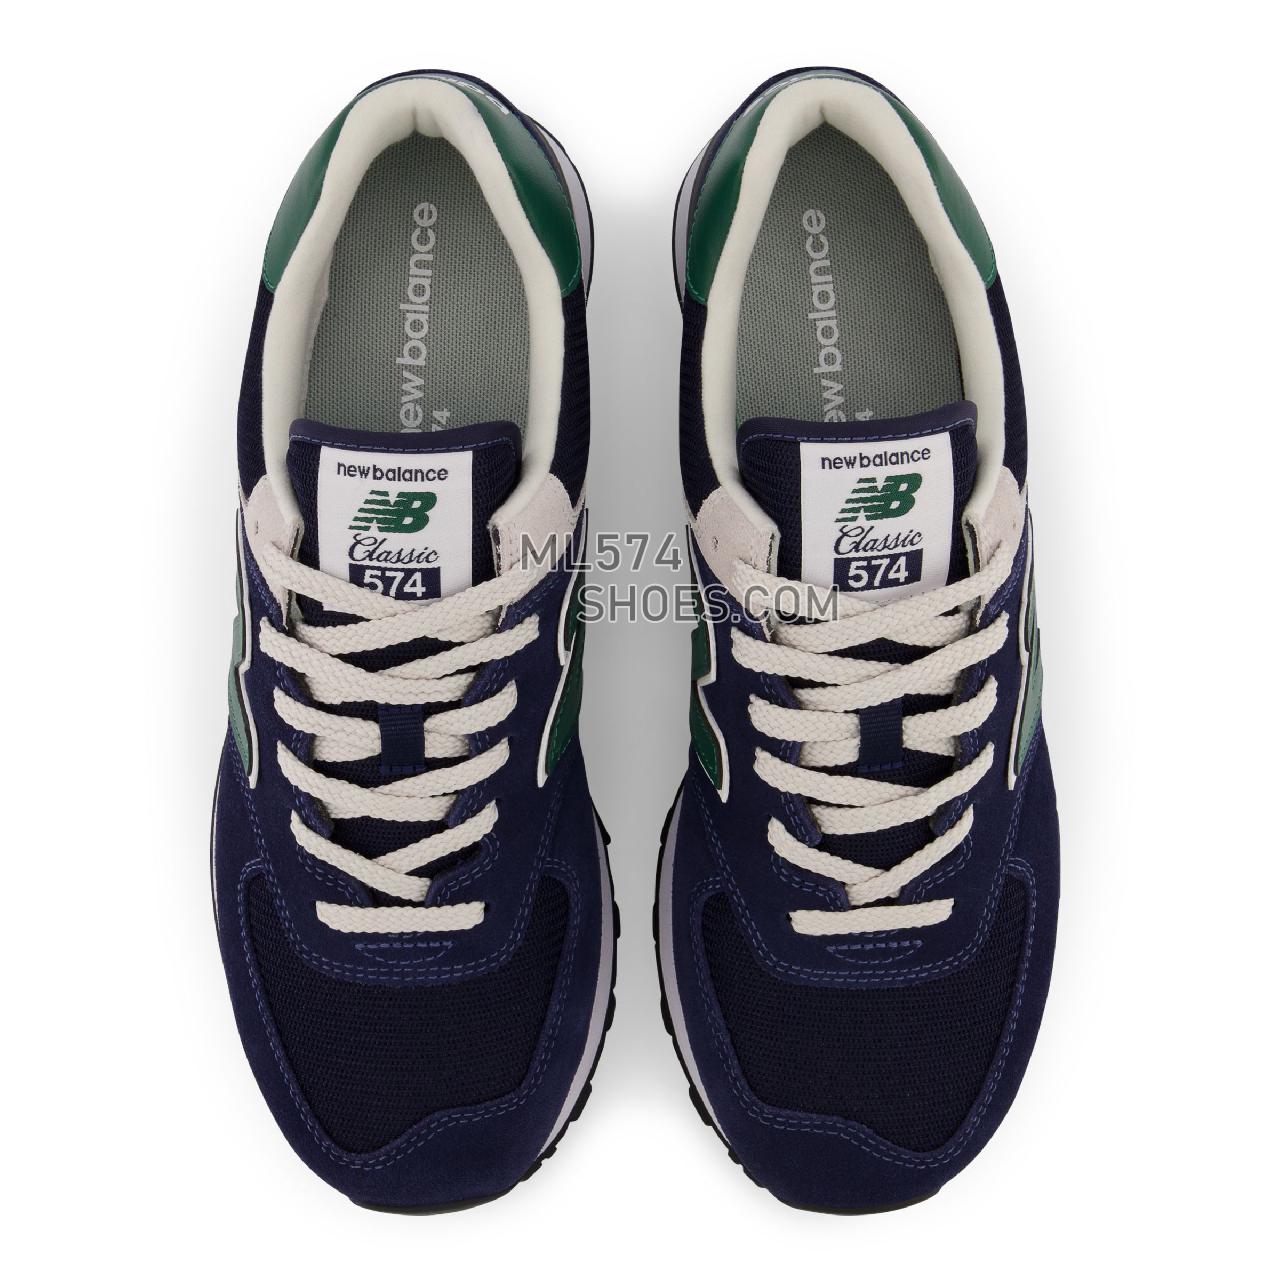 New Balance 574v2 - Men's Classic Sneakers - Navy with Green - ML574HL2